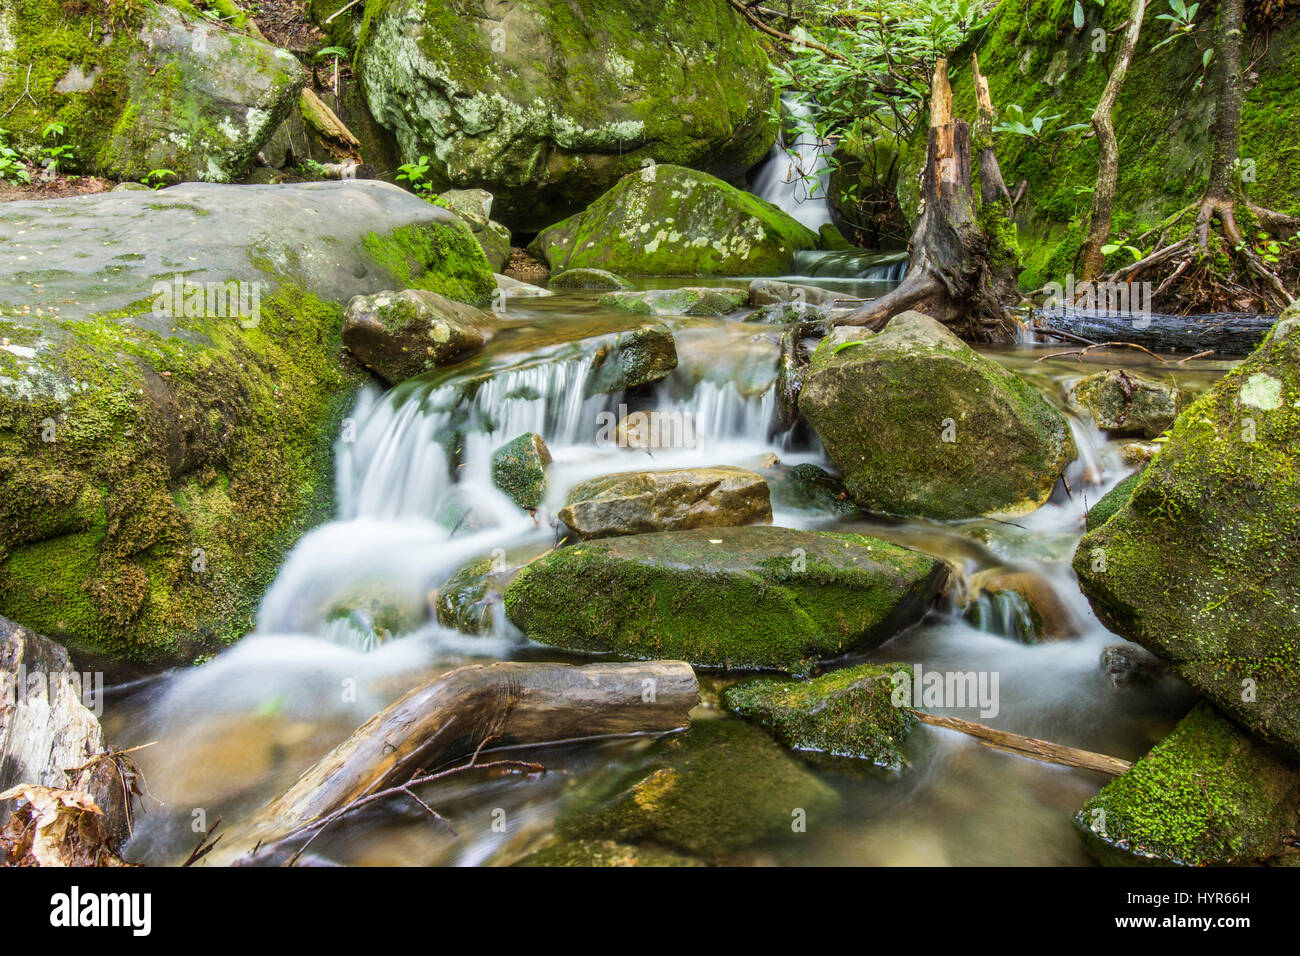 A stream flowing the Appalachian forest of Eastern Kentucky, near Bad Branch Falls. Stock Photo